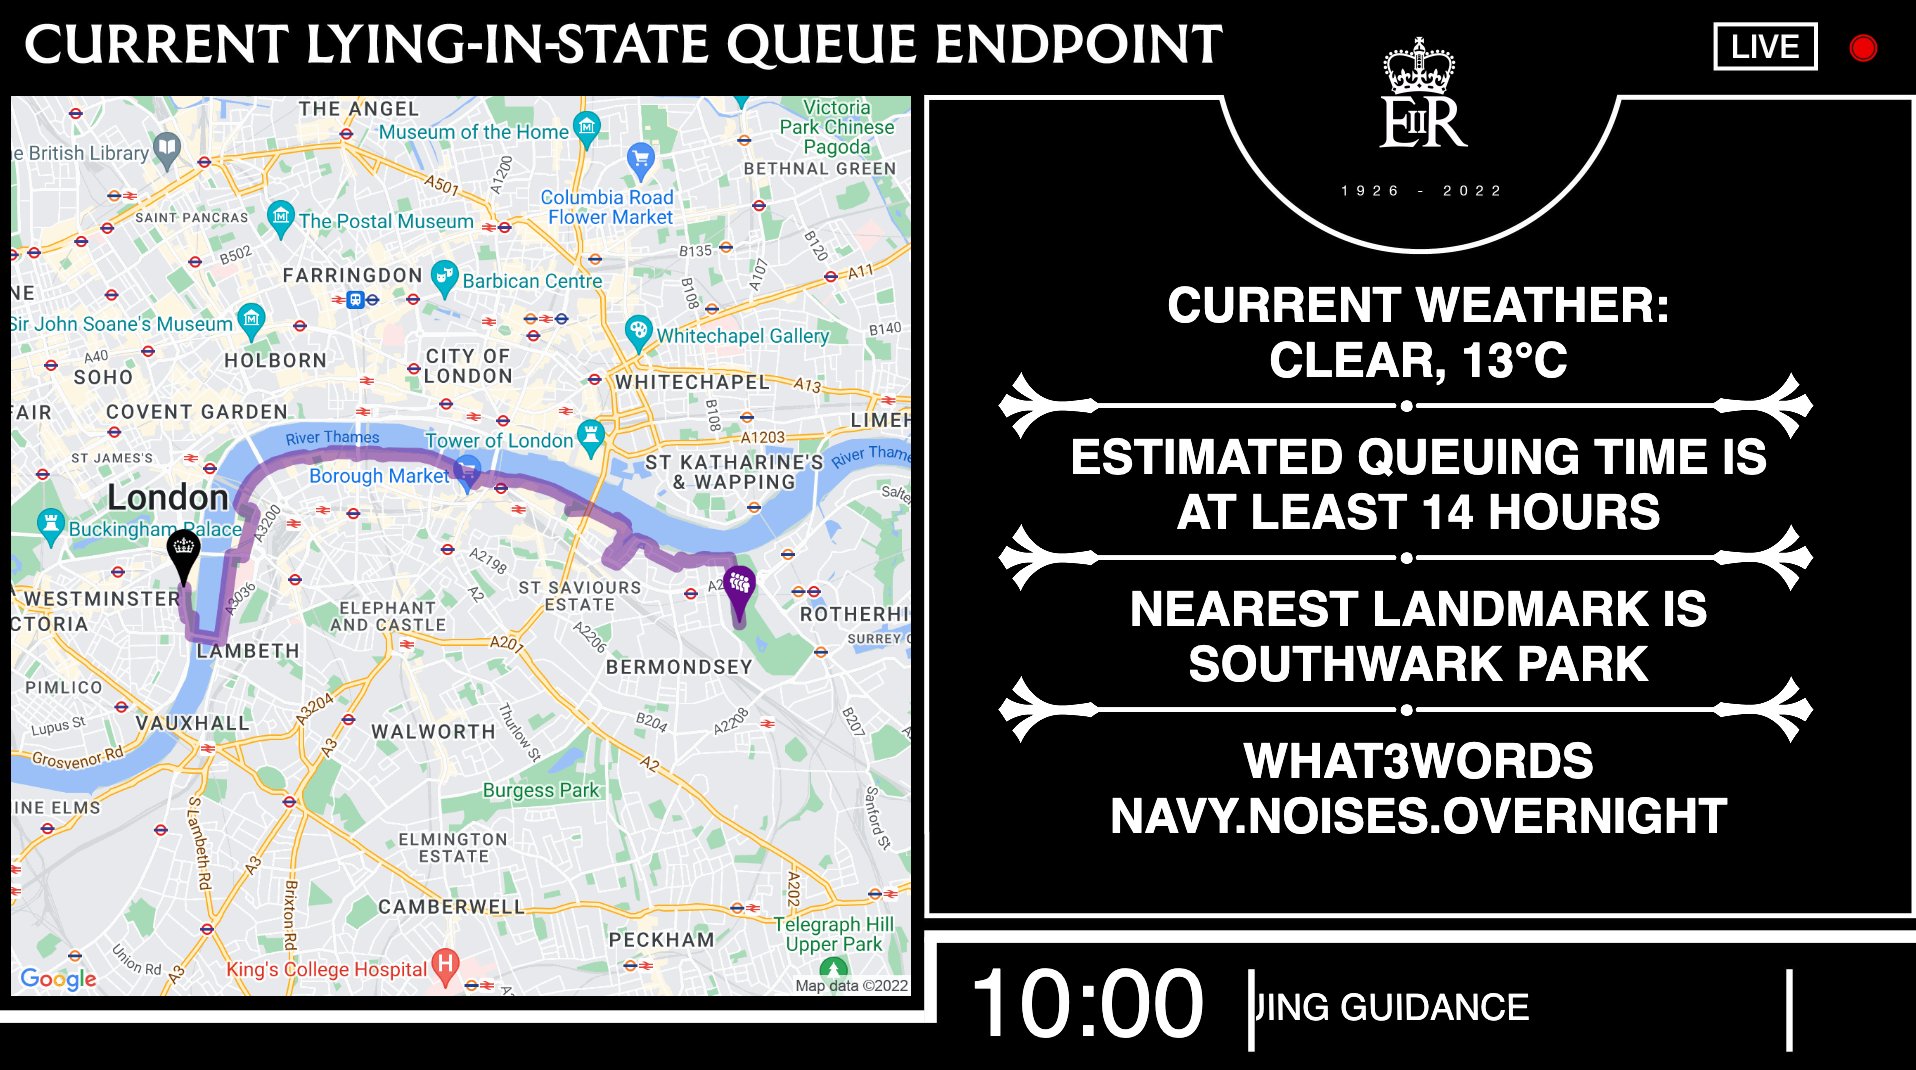 A screenshot of the queue endpoint tracker: estimated queuing time is at least 14 hours